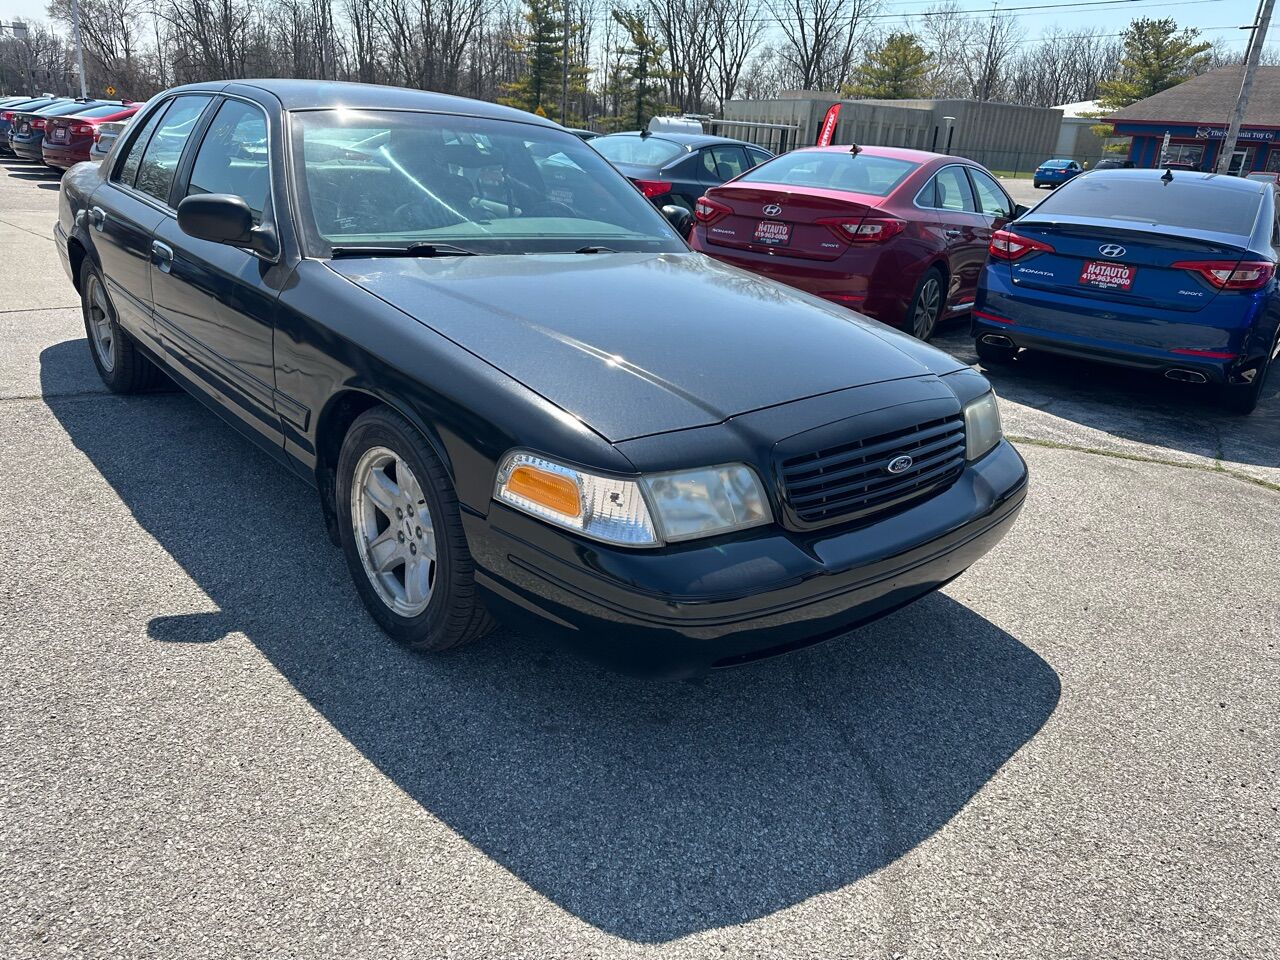 2002 Ford Crown Victoria For Sale - Carsforsale.com®